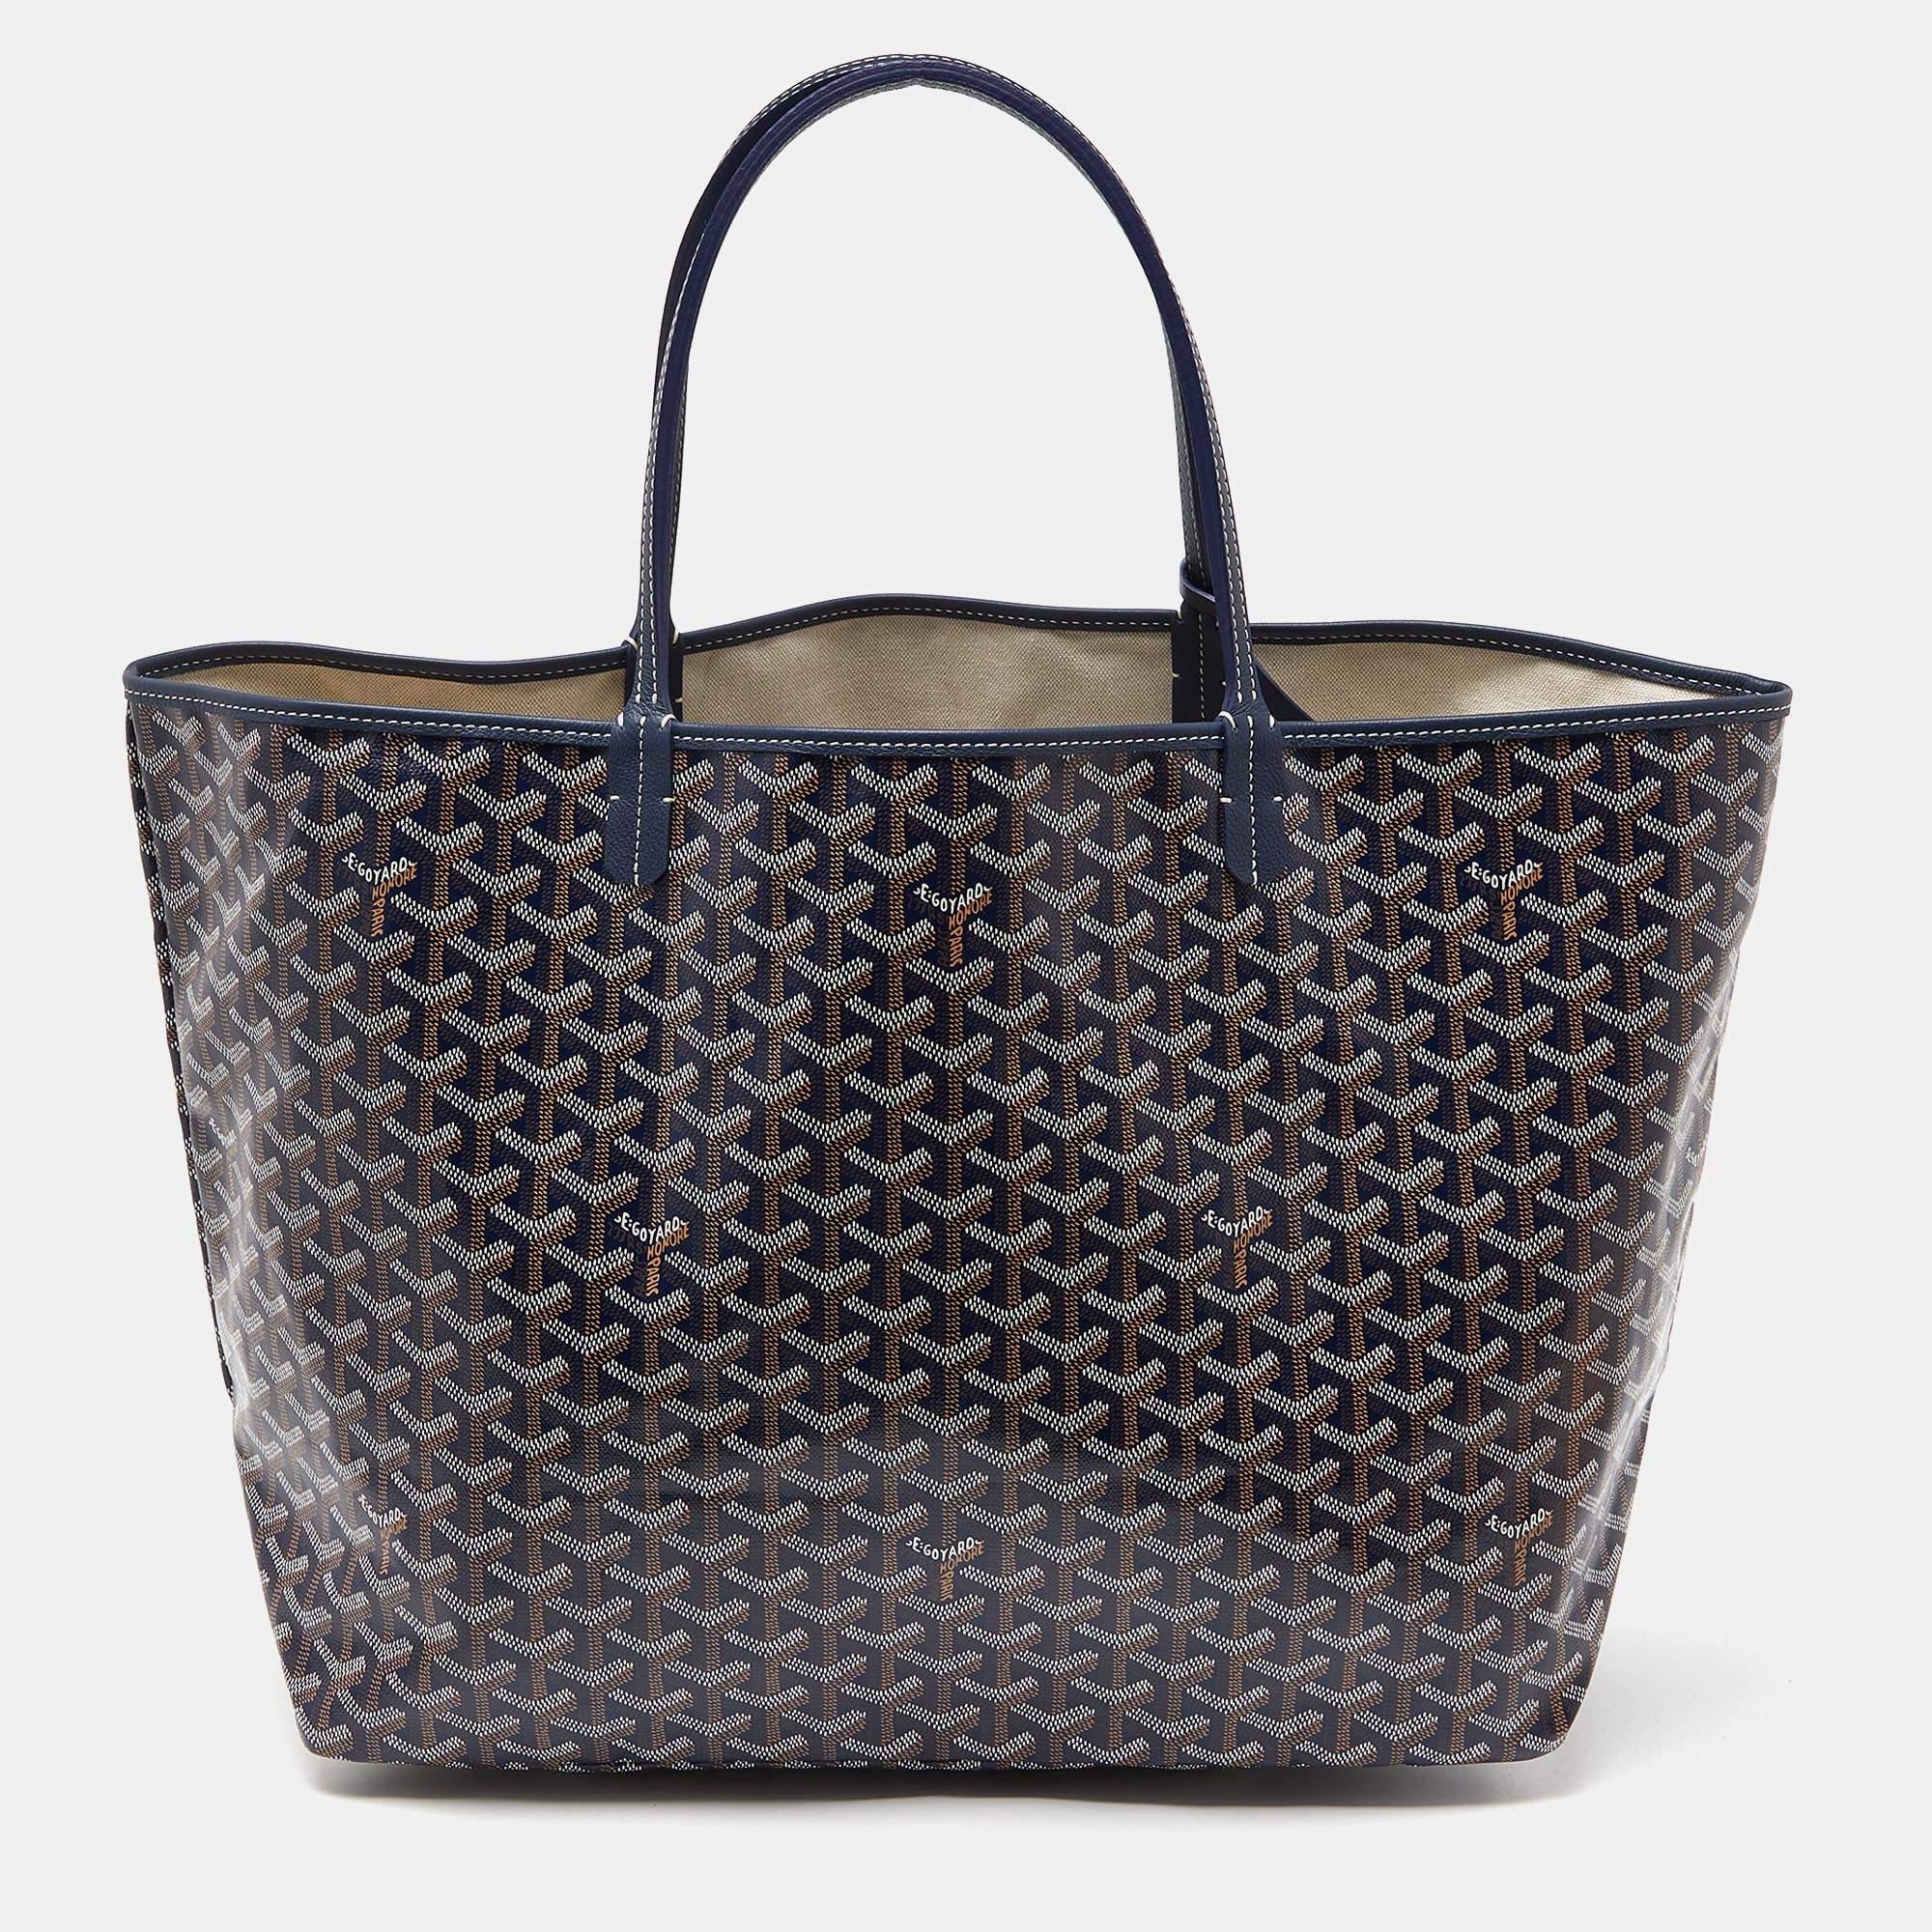 A classic bag comes with the promise of enduring appeal, boosting your style time and again. This Goyard tote is one such creation. It’s a fine purchase.

Includes: Original Dustbag, Original Pouch, Info Booklet

